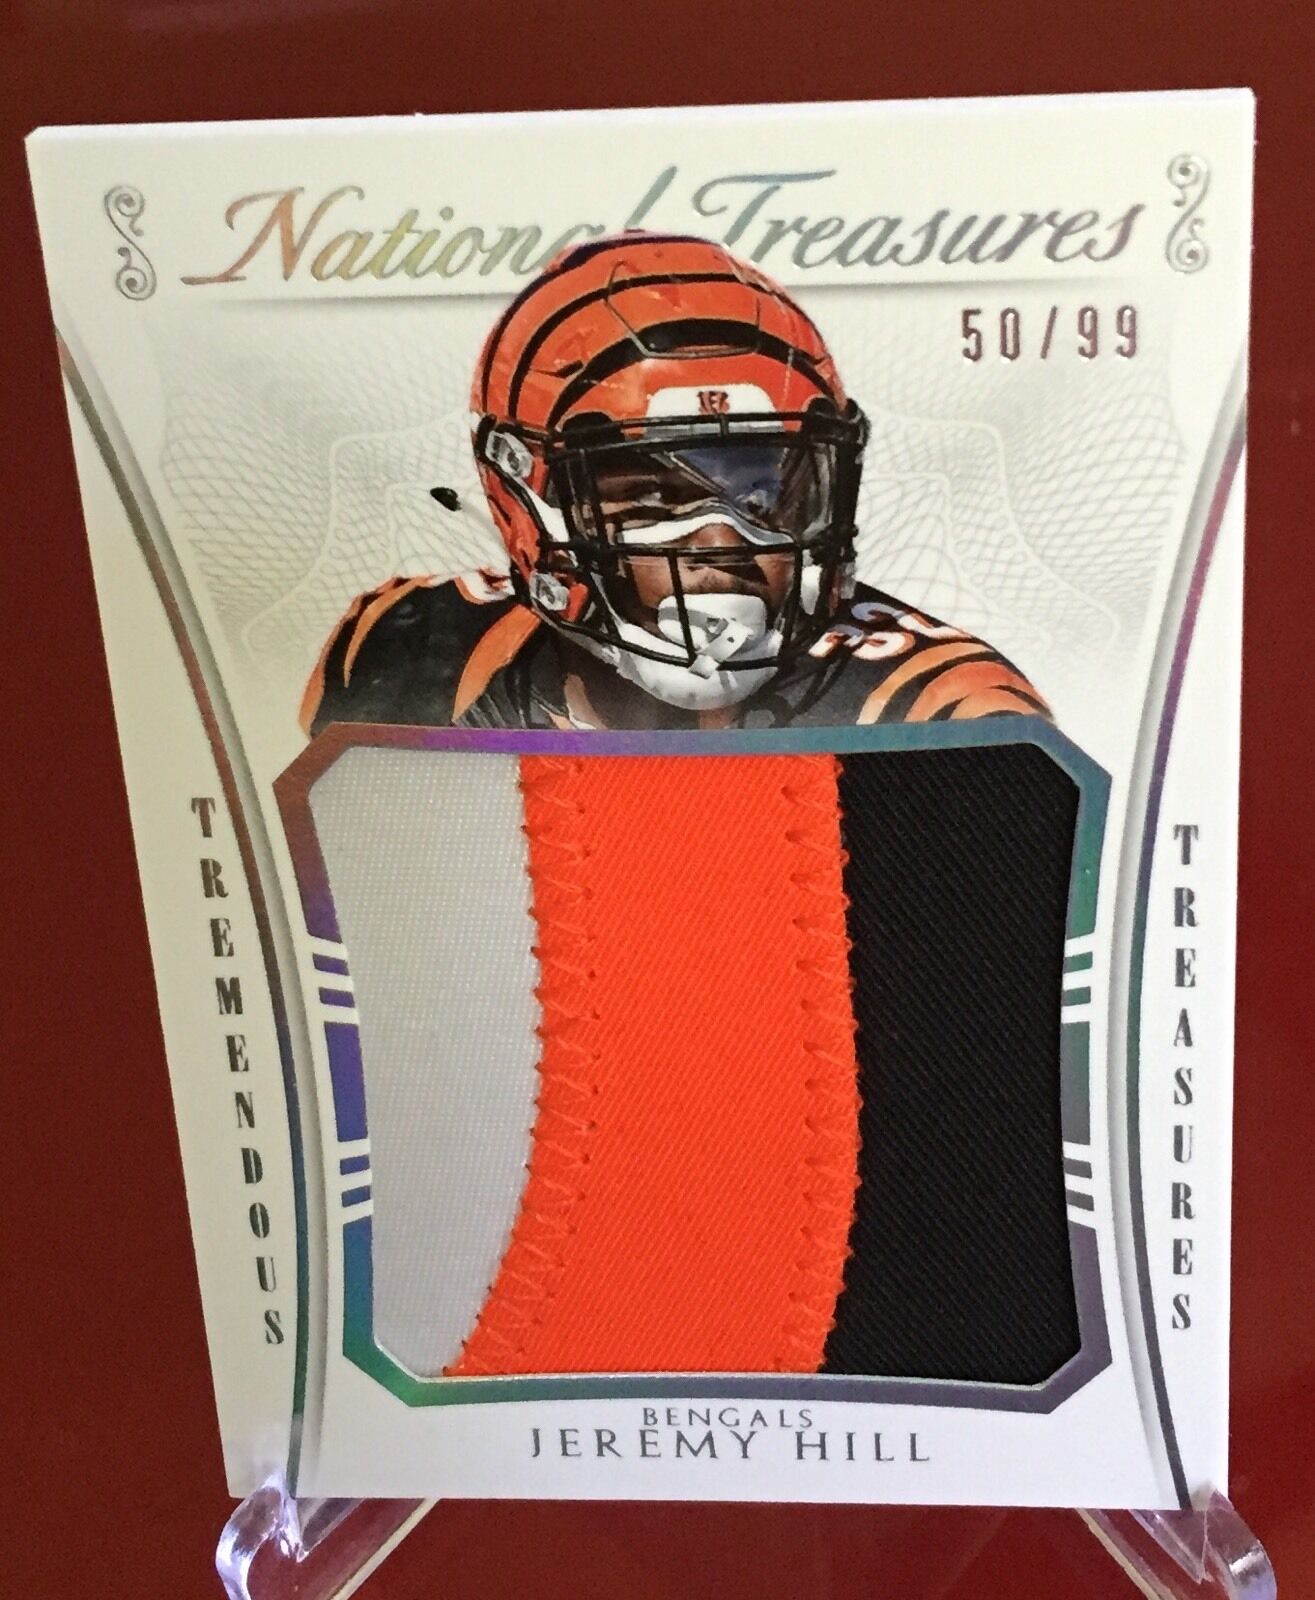 2015 National Treasures JEREMY HILL Bengals Jumbo (3 Color) Patch #TTRJH - 59/99